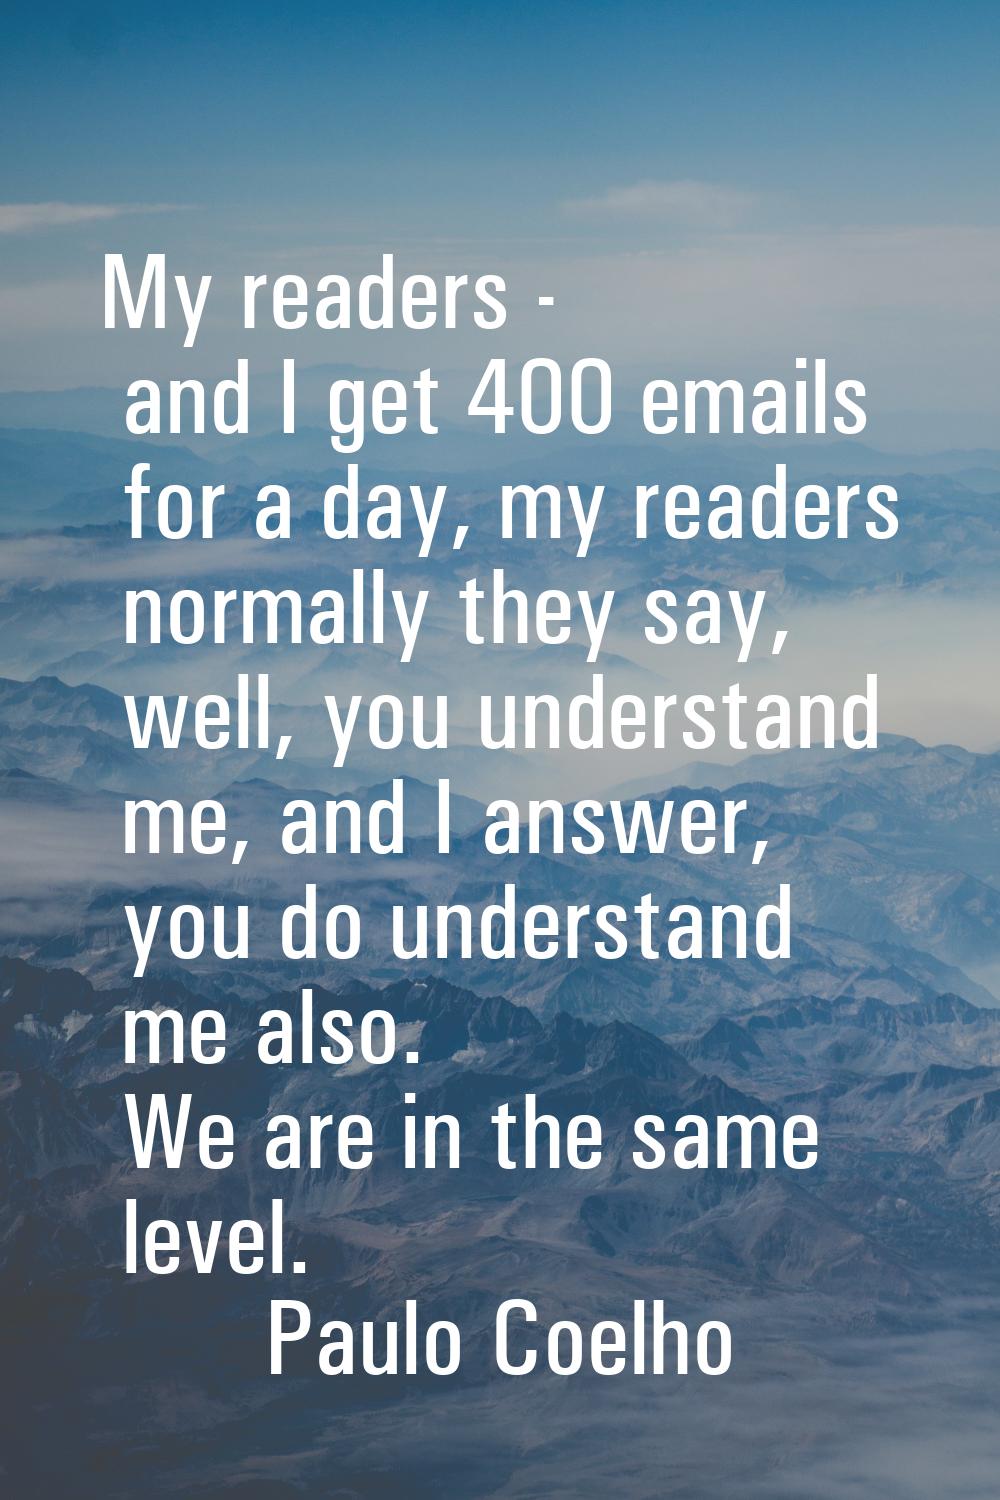 My readers - and I get 400 emails for a day, my readers normally they say, well, you understand me,